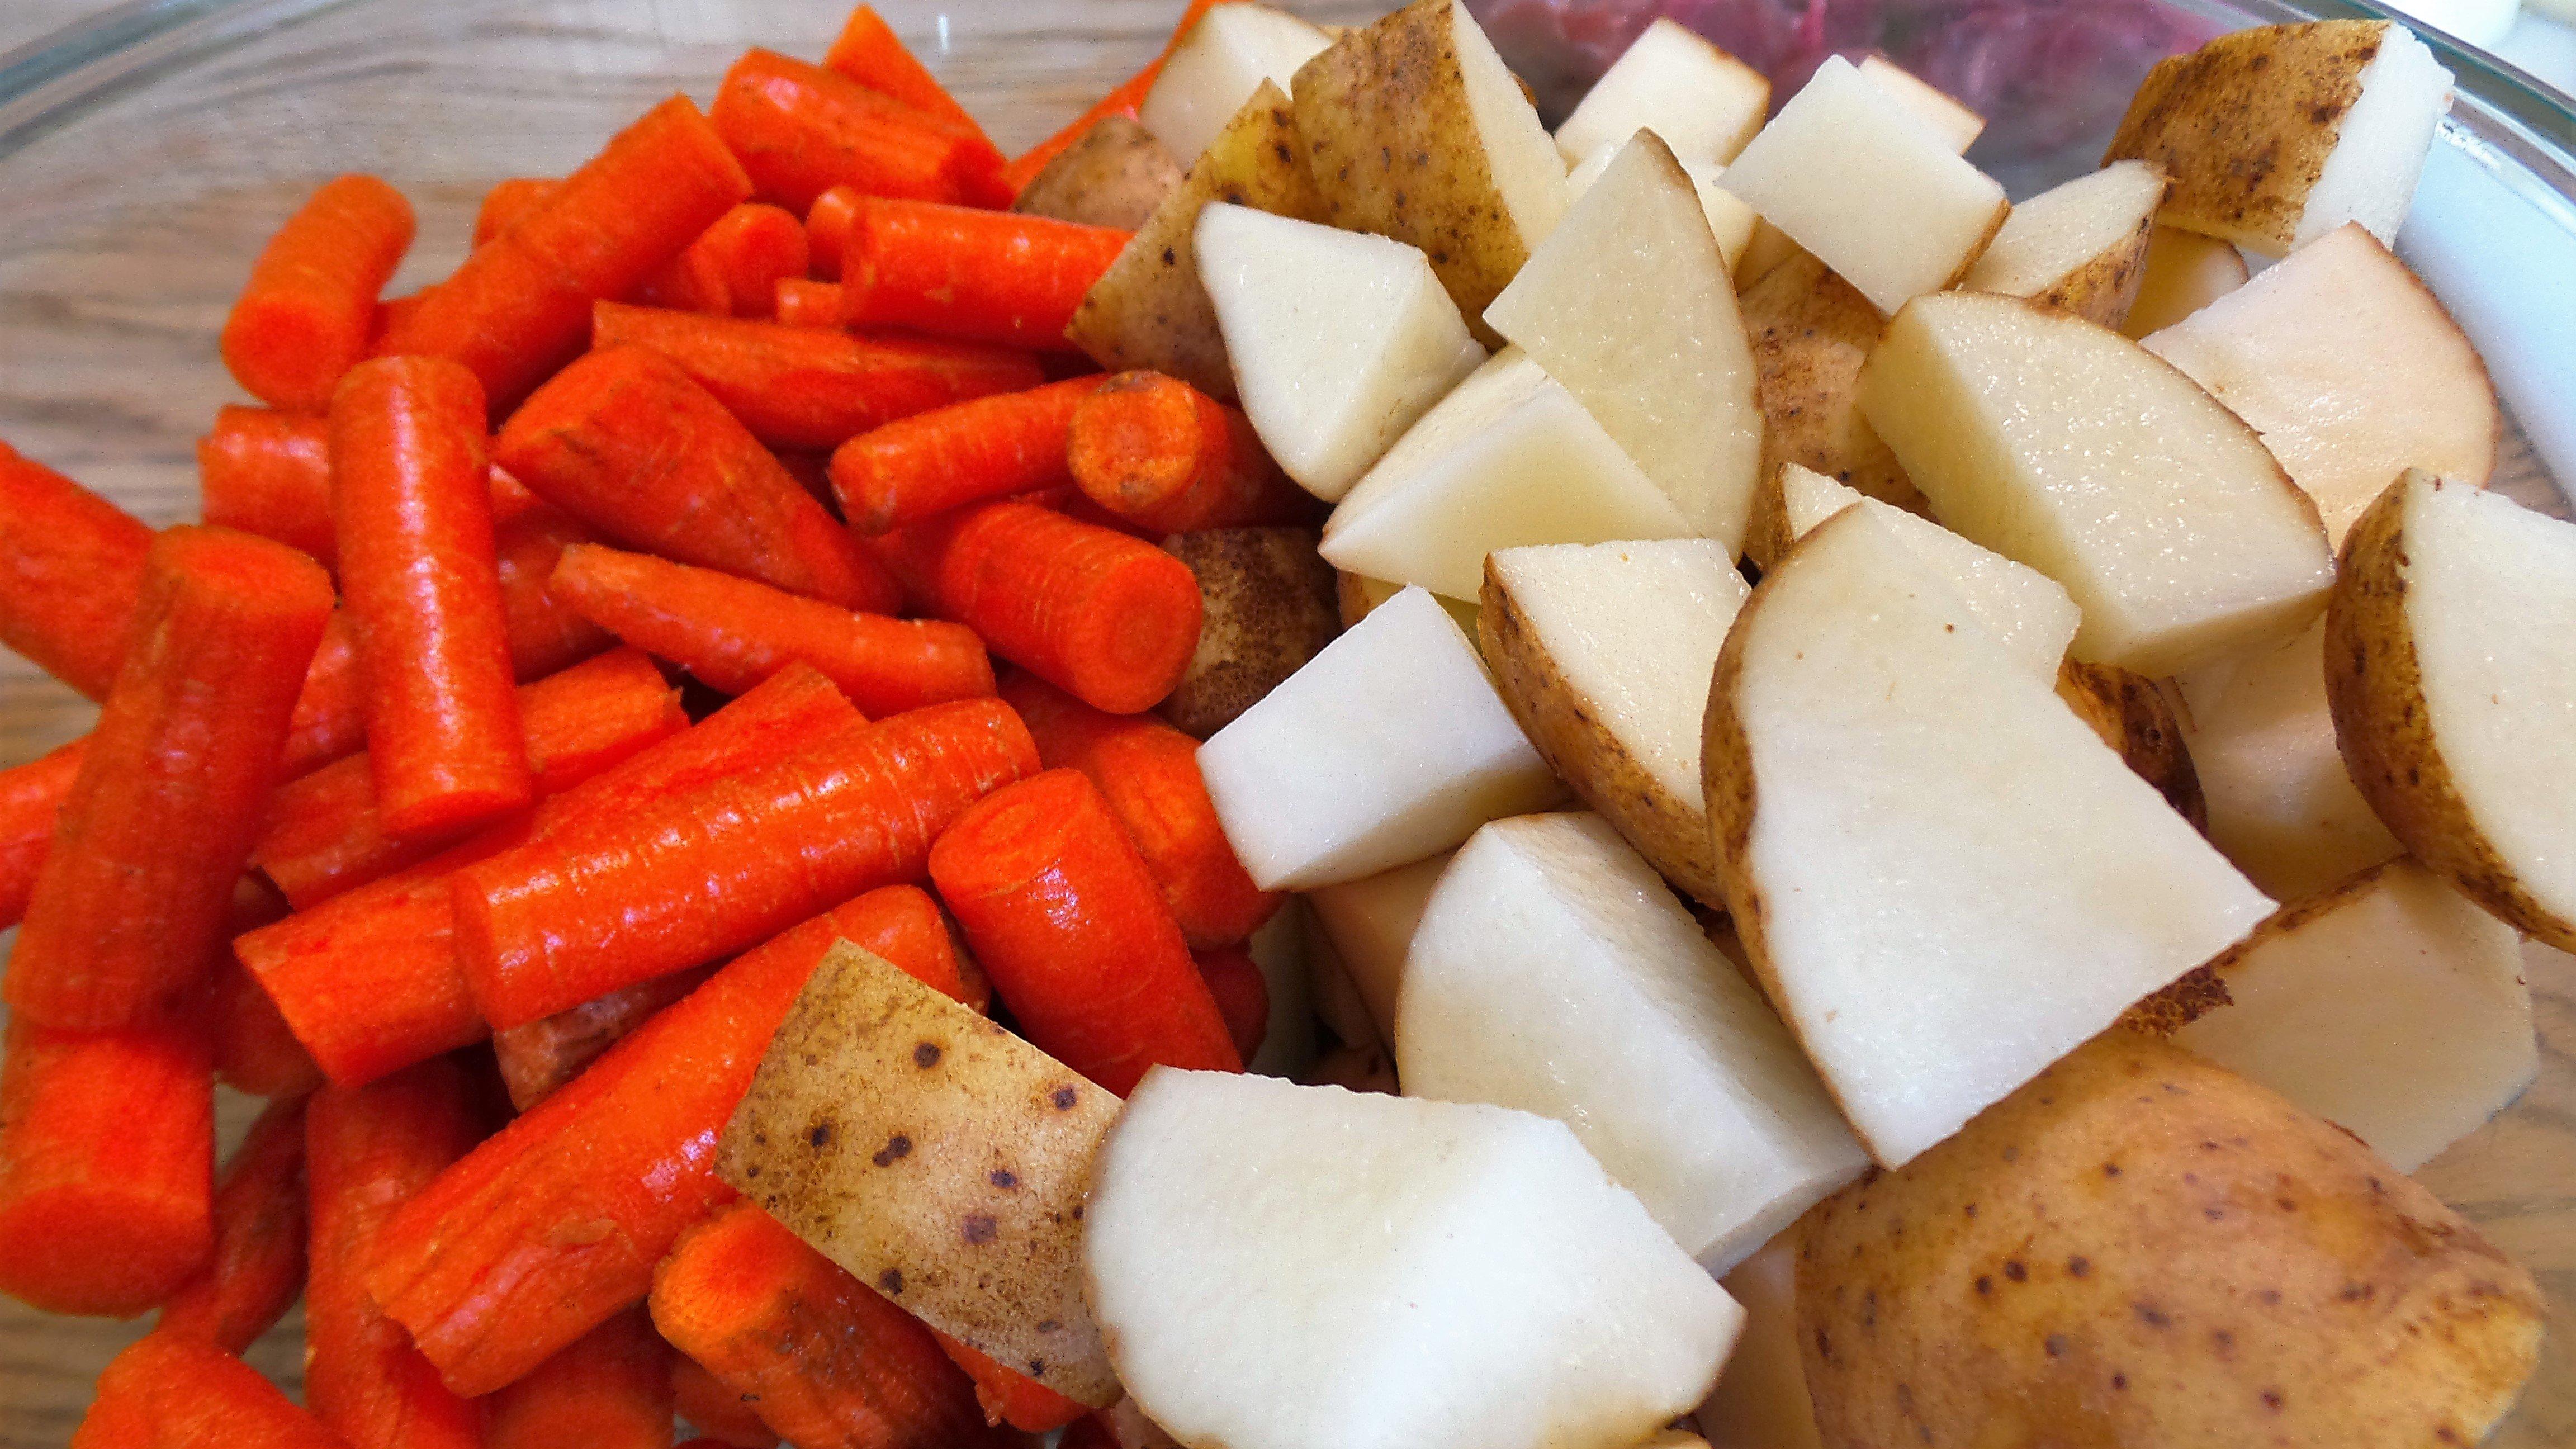 Prep the vegetables beforehand to speed the cooking process.